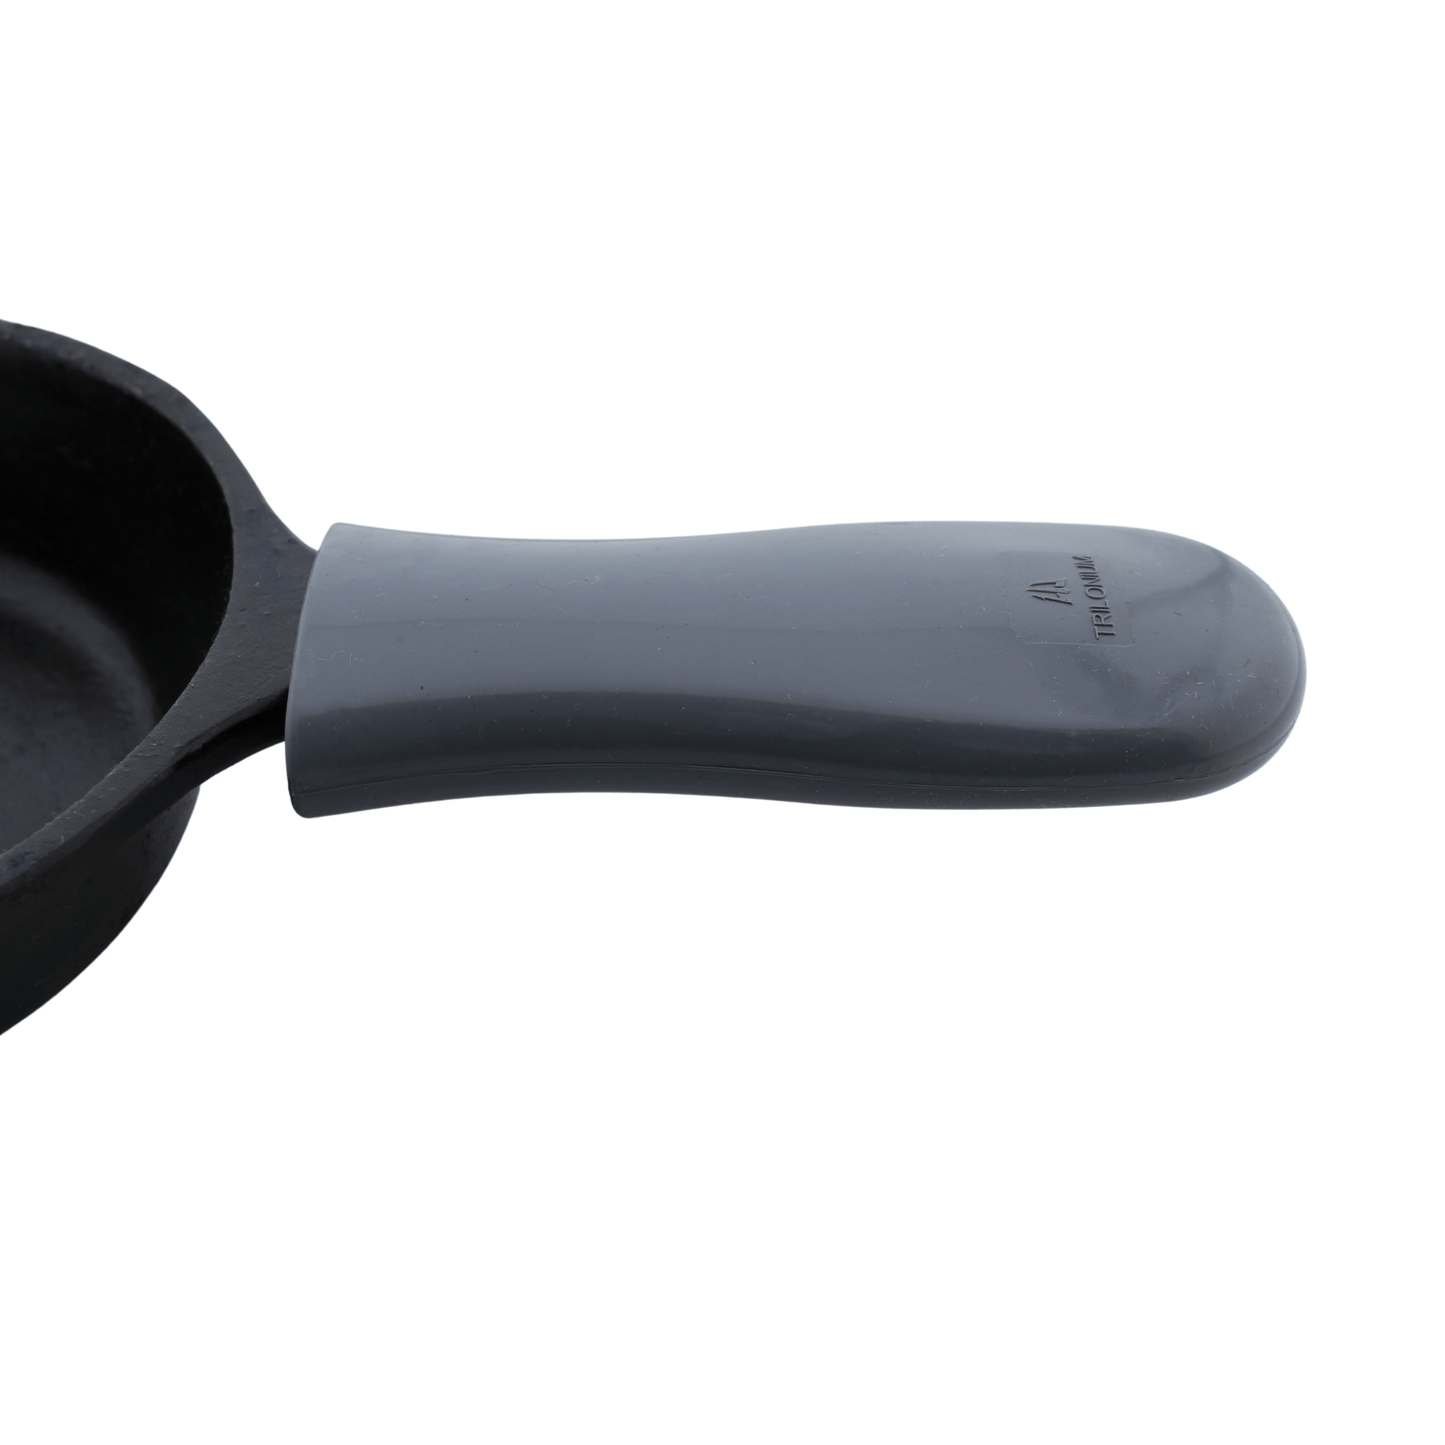 Silicone Heat proof Skillet sleeve grip for hot handles of cast iron skillets, tawas, grill pans, etc..